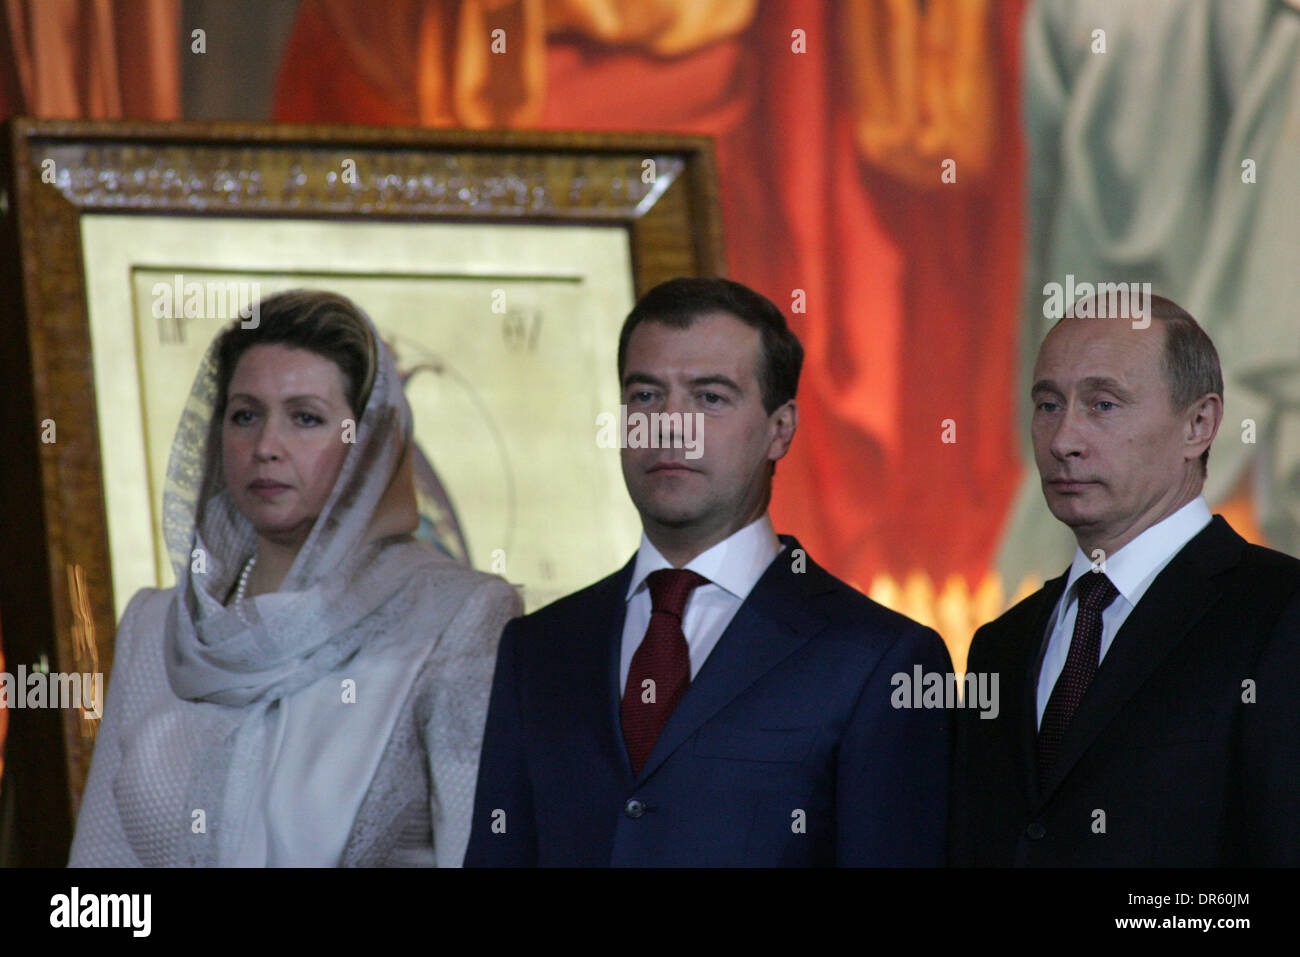 Apr 19, 2009 - Moscow, Russia - Prime Minister of Russia VLADIMIR PUTIN (c) and President DMITRY MEDVEDEV with wife Svetlana (L) get Easter blessing at Orthodox ceremony at the Christ the Savior Cathedral in Moscow. (Credit Image: © PhotoXpress/ZUMA Press) Stock Photo